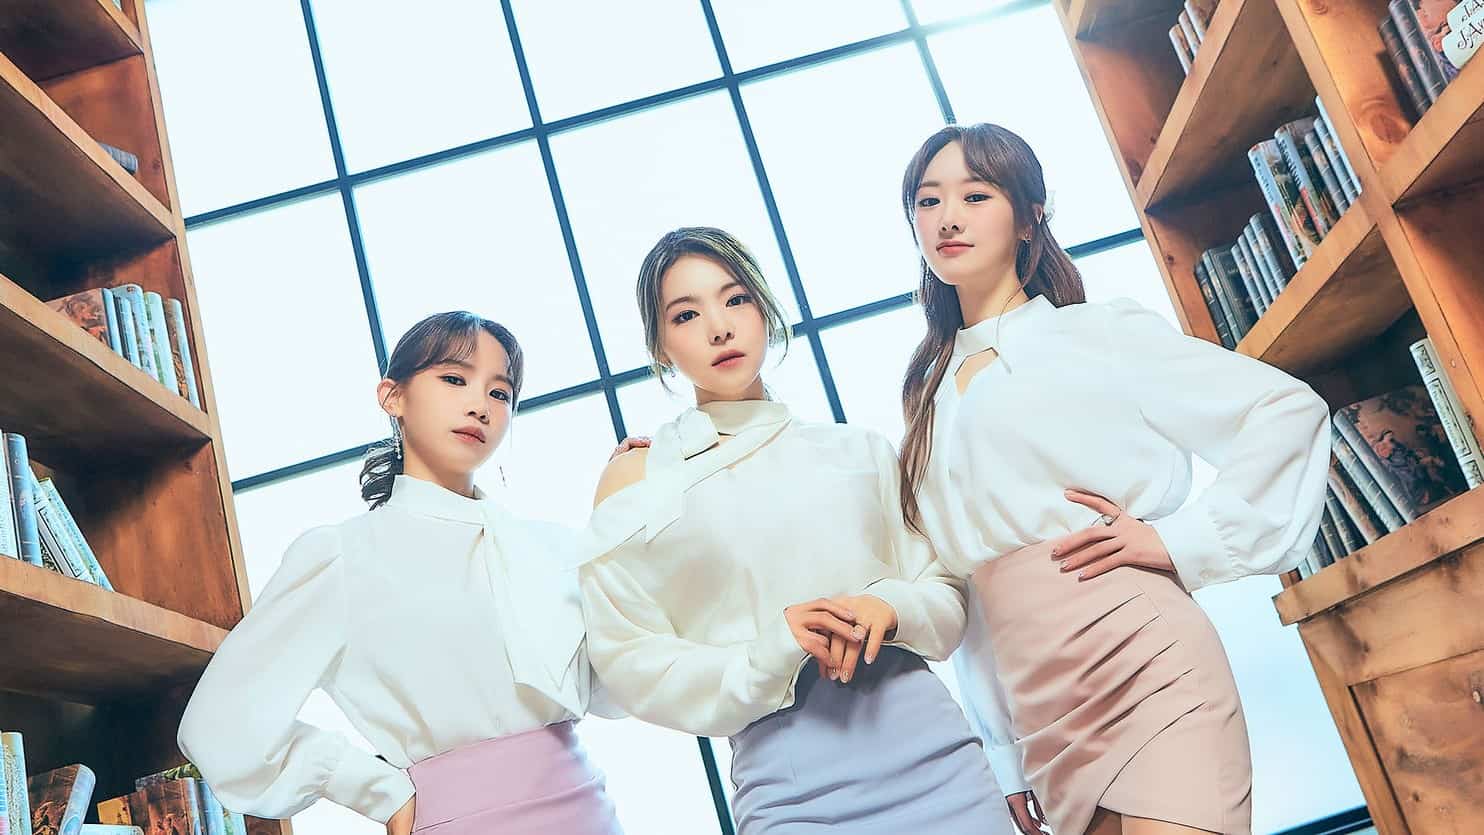 MINIMANI (Trot Girl Group): Members, Age, Height, Songs & Relationship Status